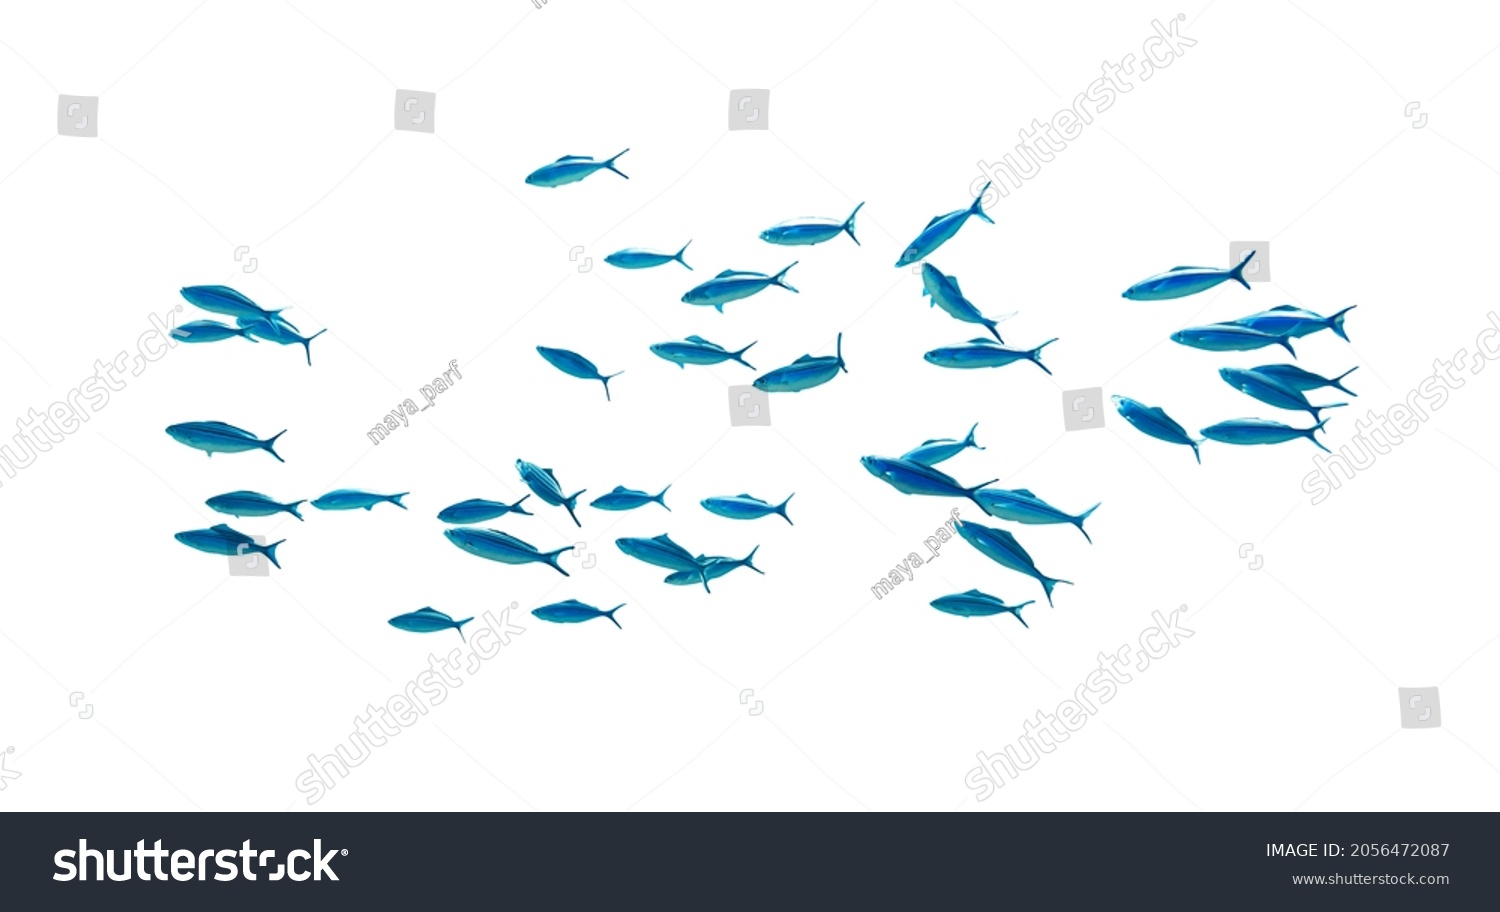 Shool of blue tropical striped fish in the ocean isolated on white background. Caesio Striata (Striated Fusilier) swimming  deep underwater in Red Sea. Flock of tropical blue fish, cut out.  #2056472087